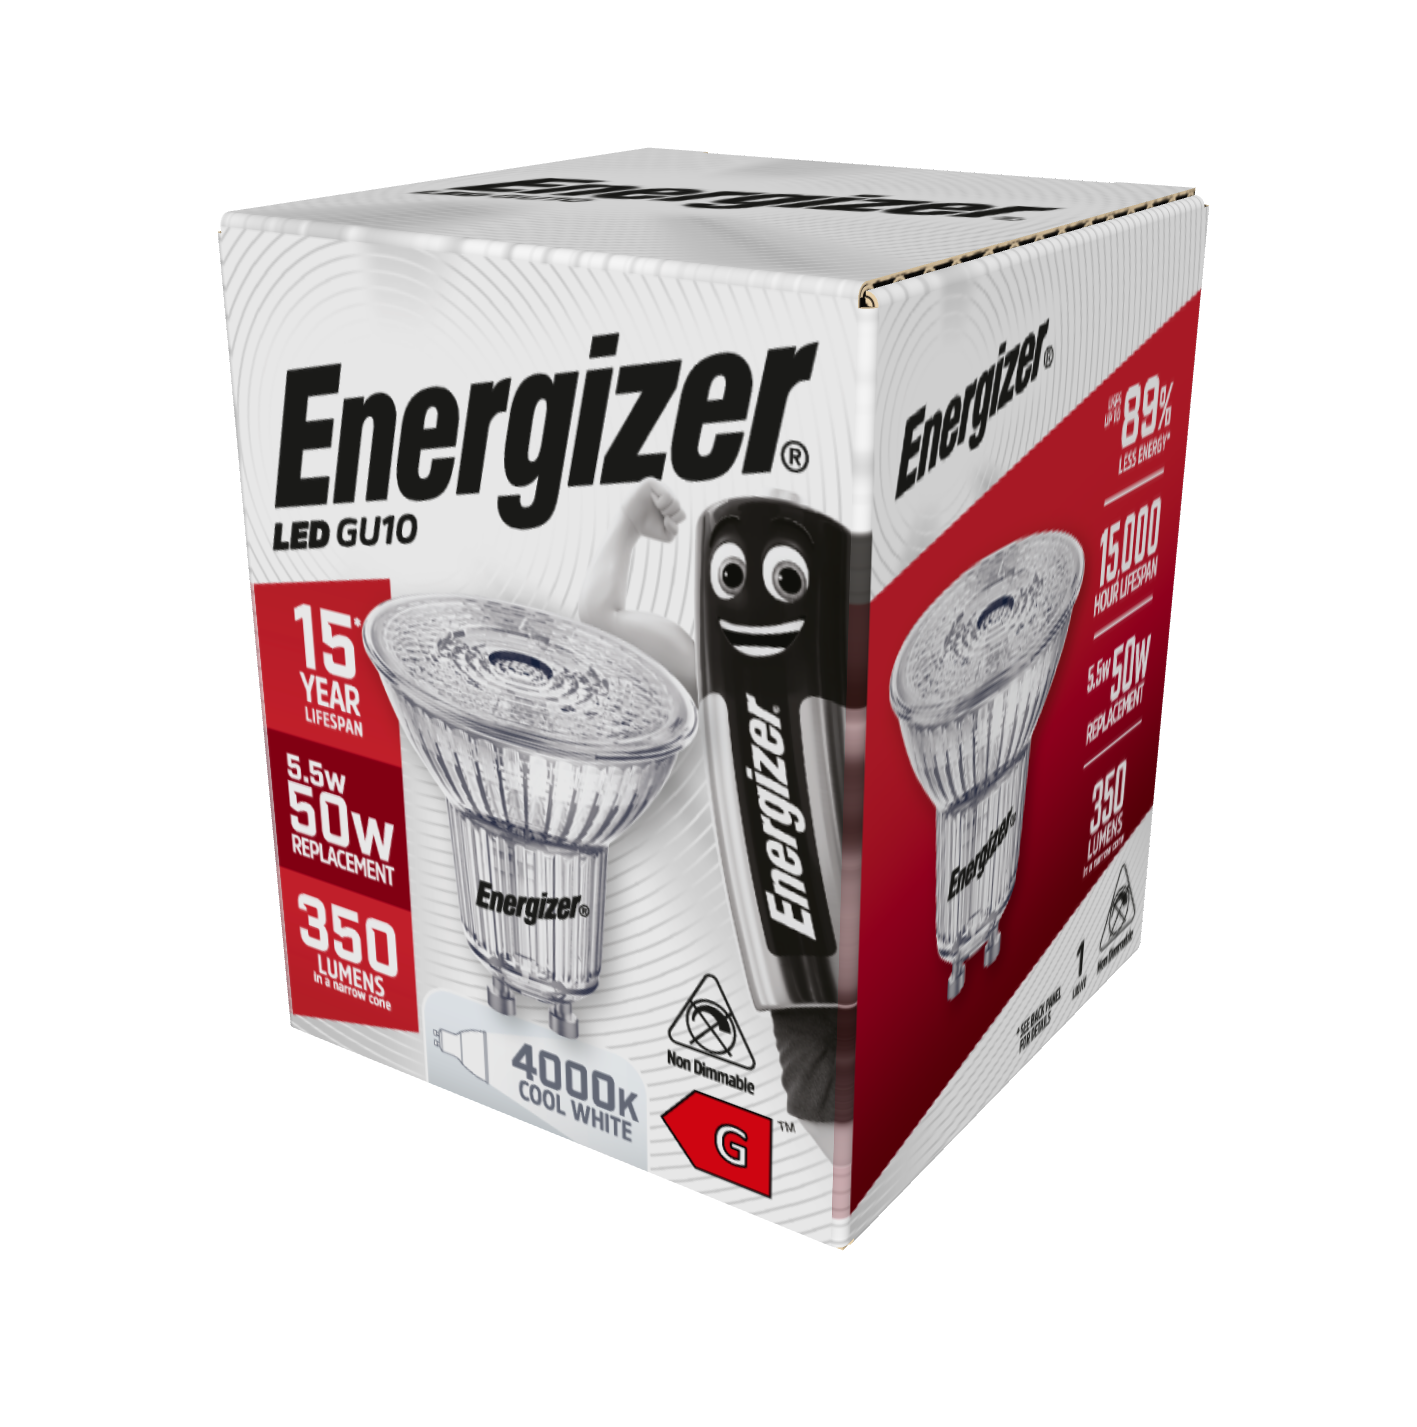 Energizer LED GU10 350lm 5.5W 4,000K (Cool White) Dimmable, Box of 1